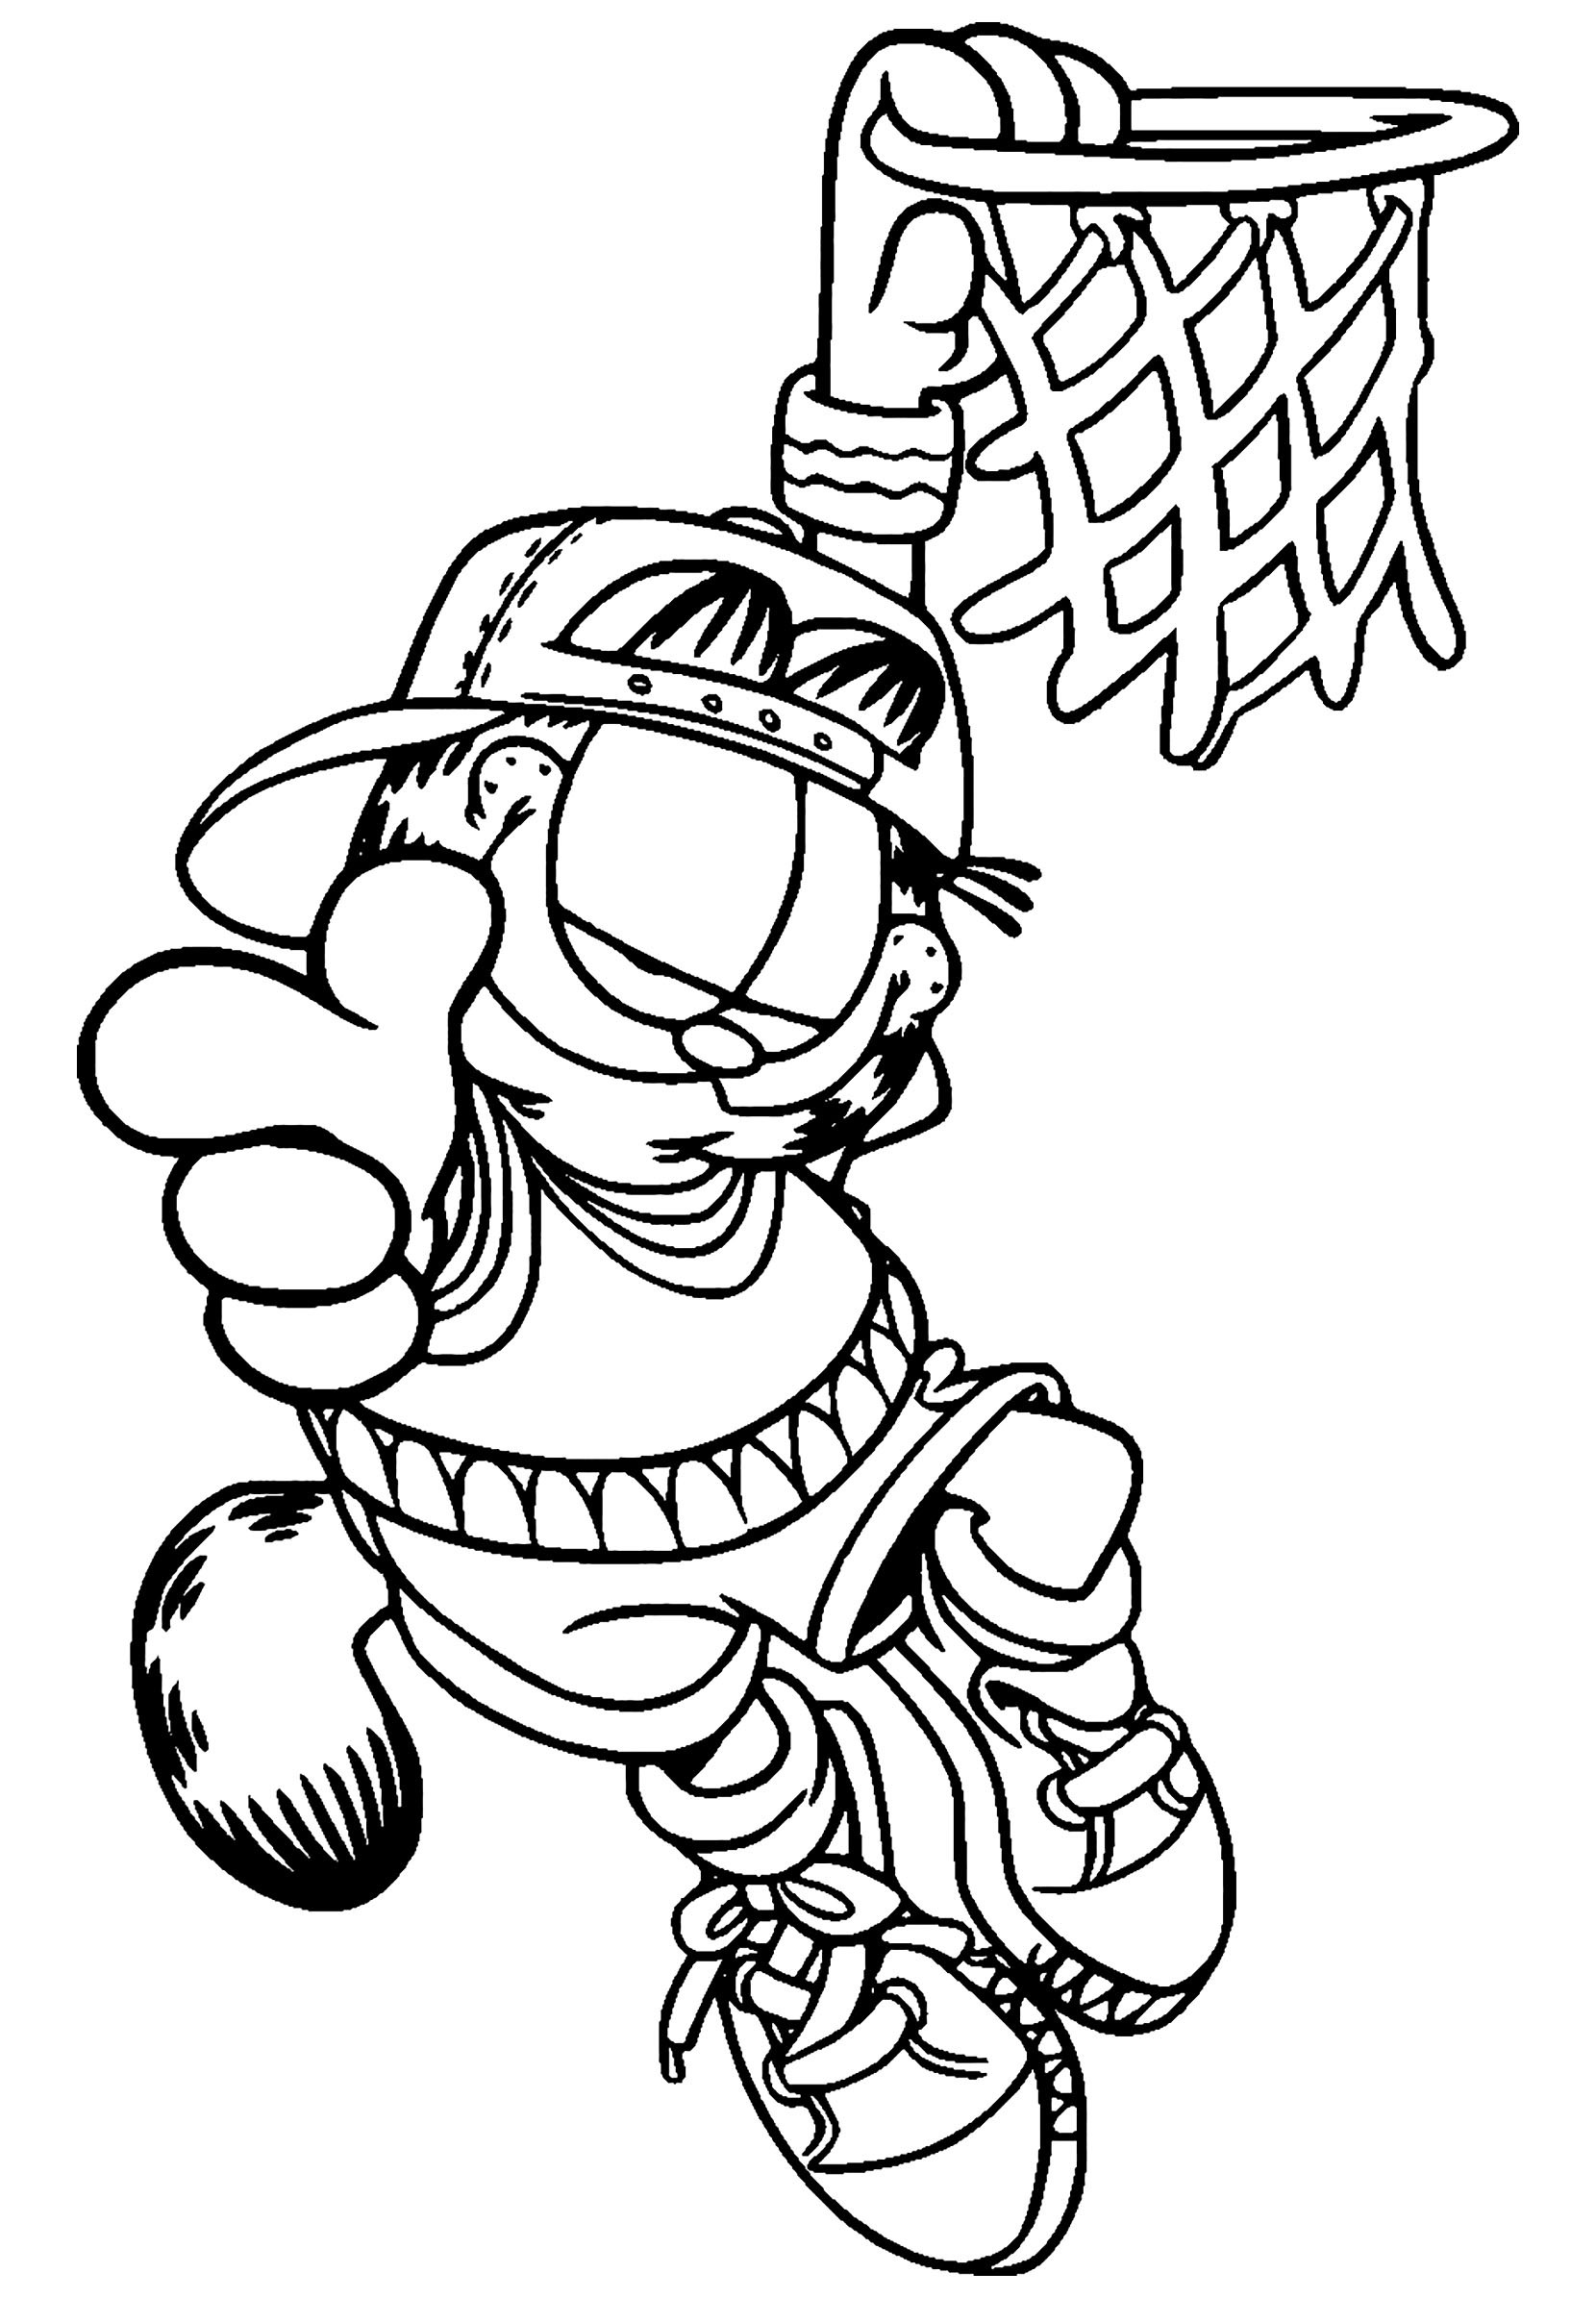 Kids Coloring Page
 Garfield to Garfield Kids Coloring Pages